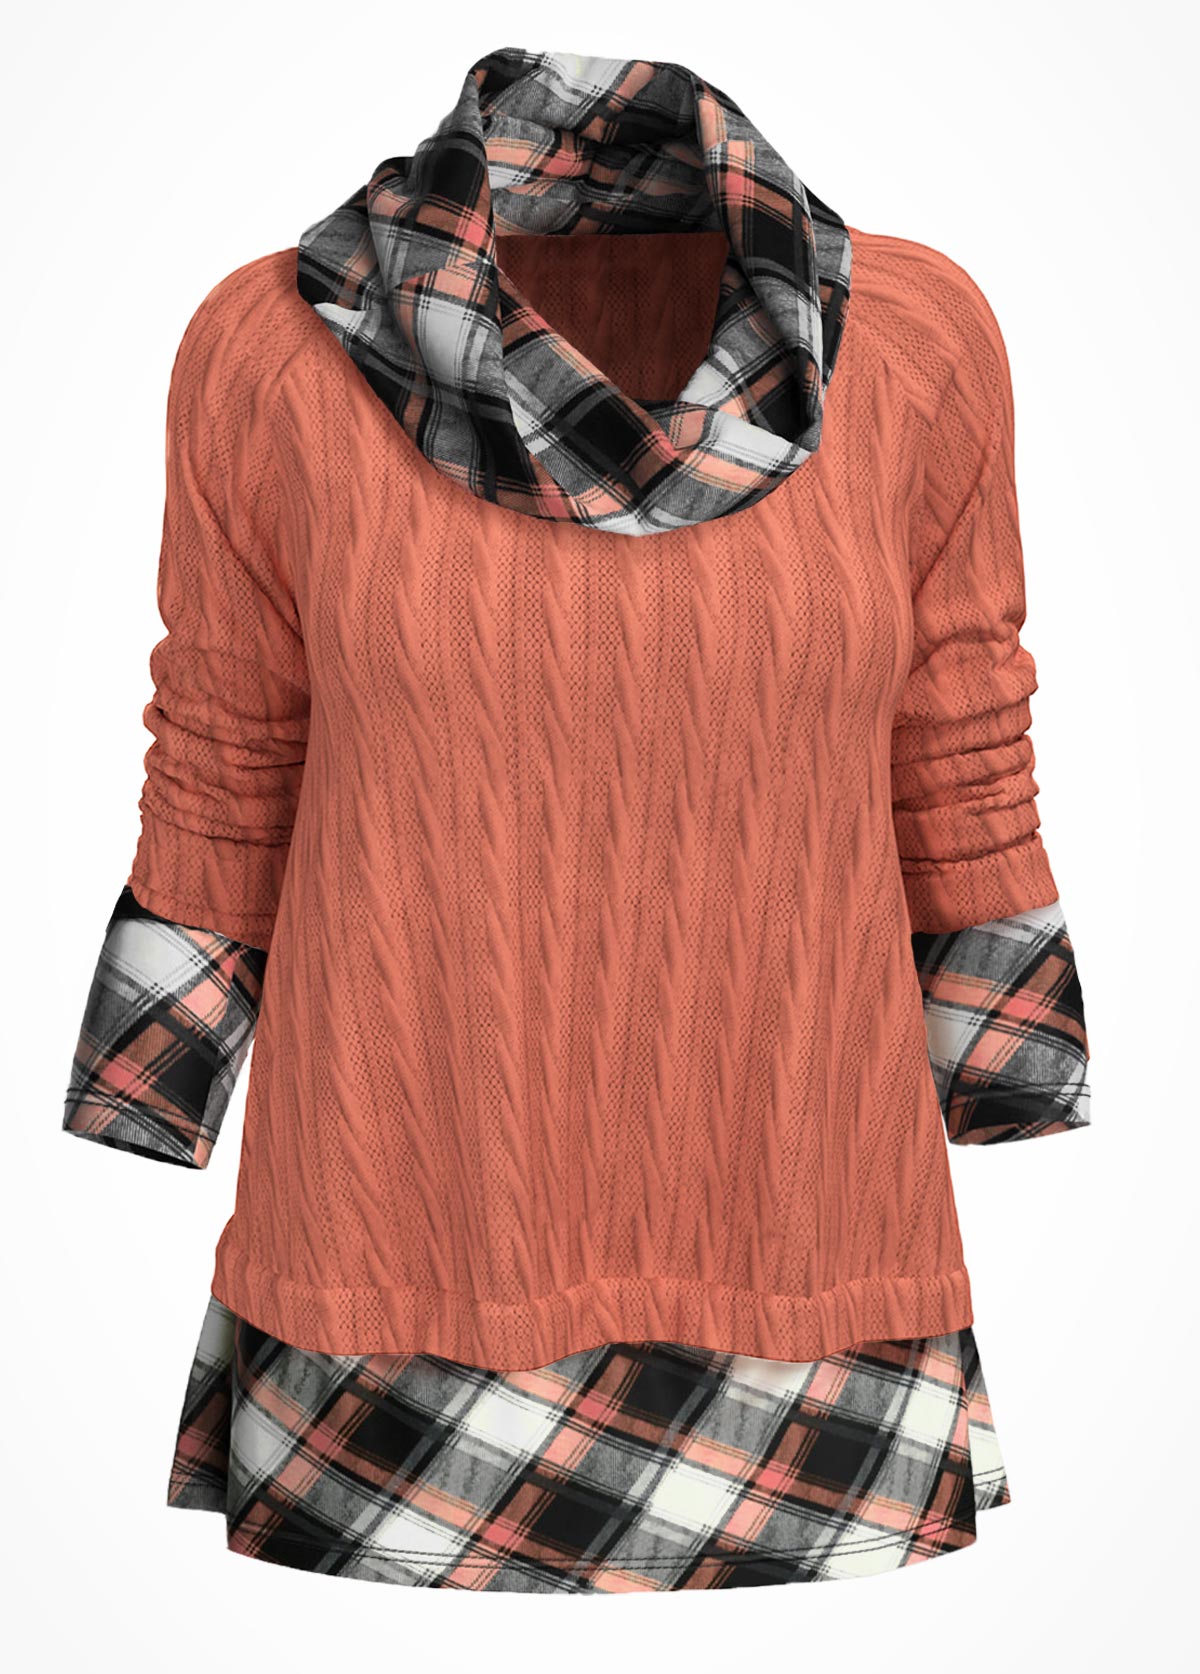 Plaid Fabric Splicing Long Sleeve Cowl Neck Sweater